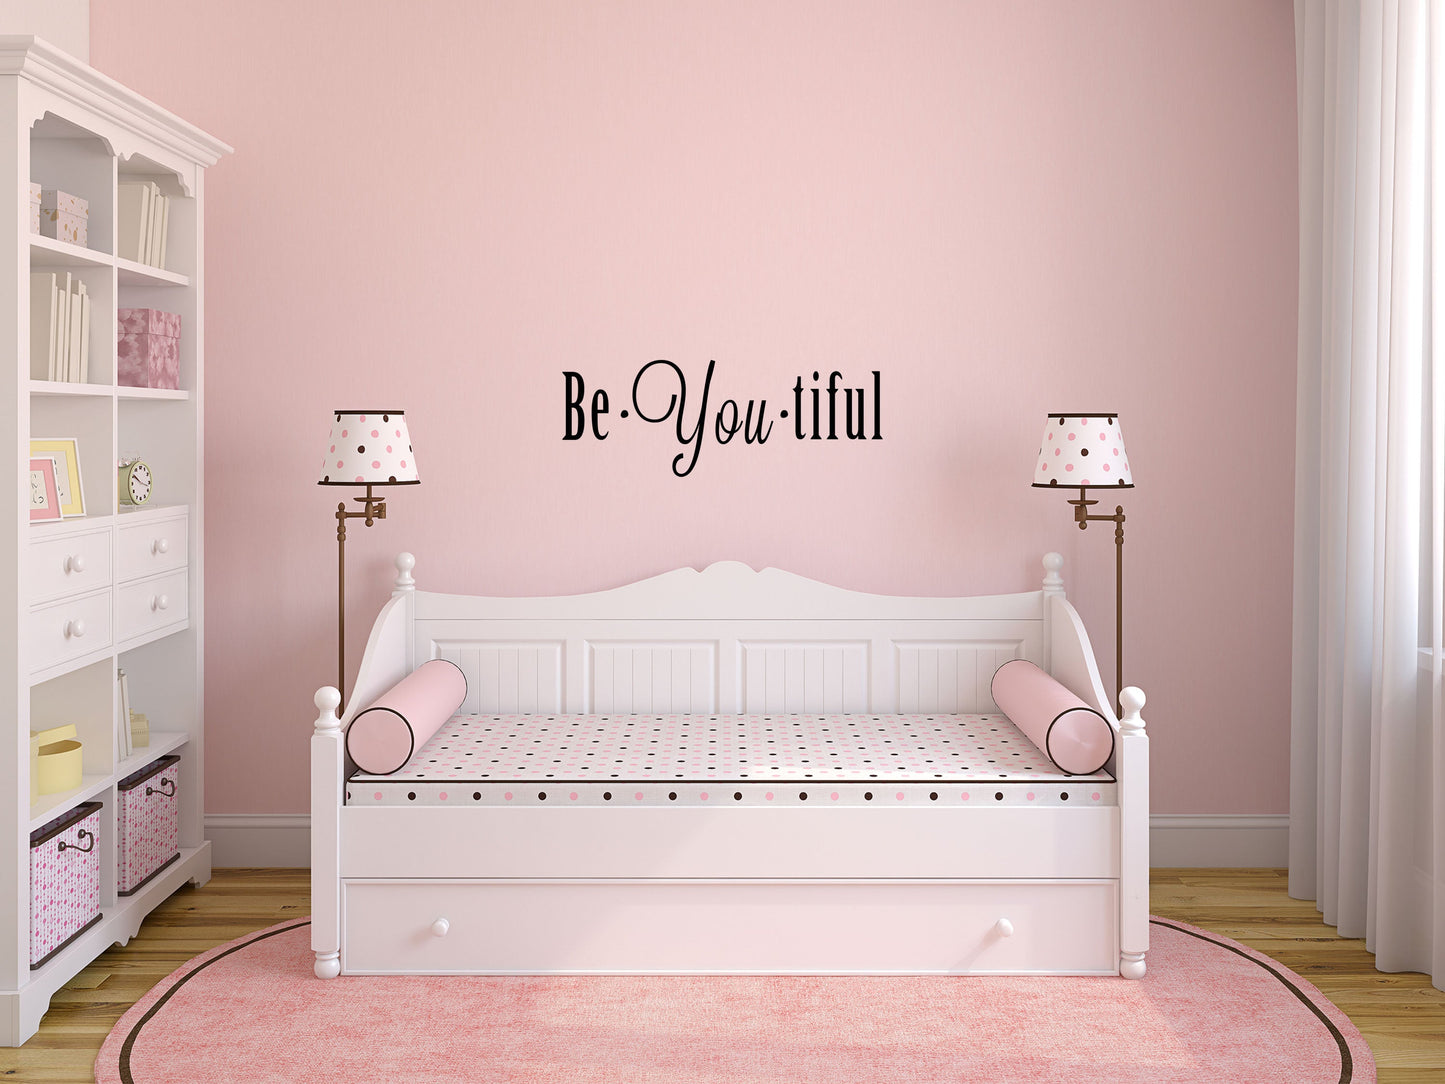 Be You Tiful Bedroom Quote Sticker Vinyl Wall Decal Inspirational Wall Signs 